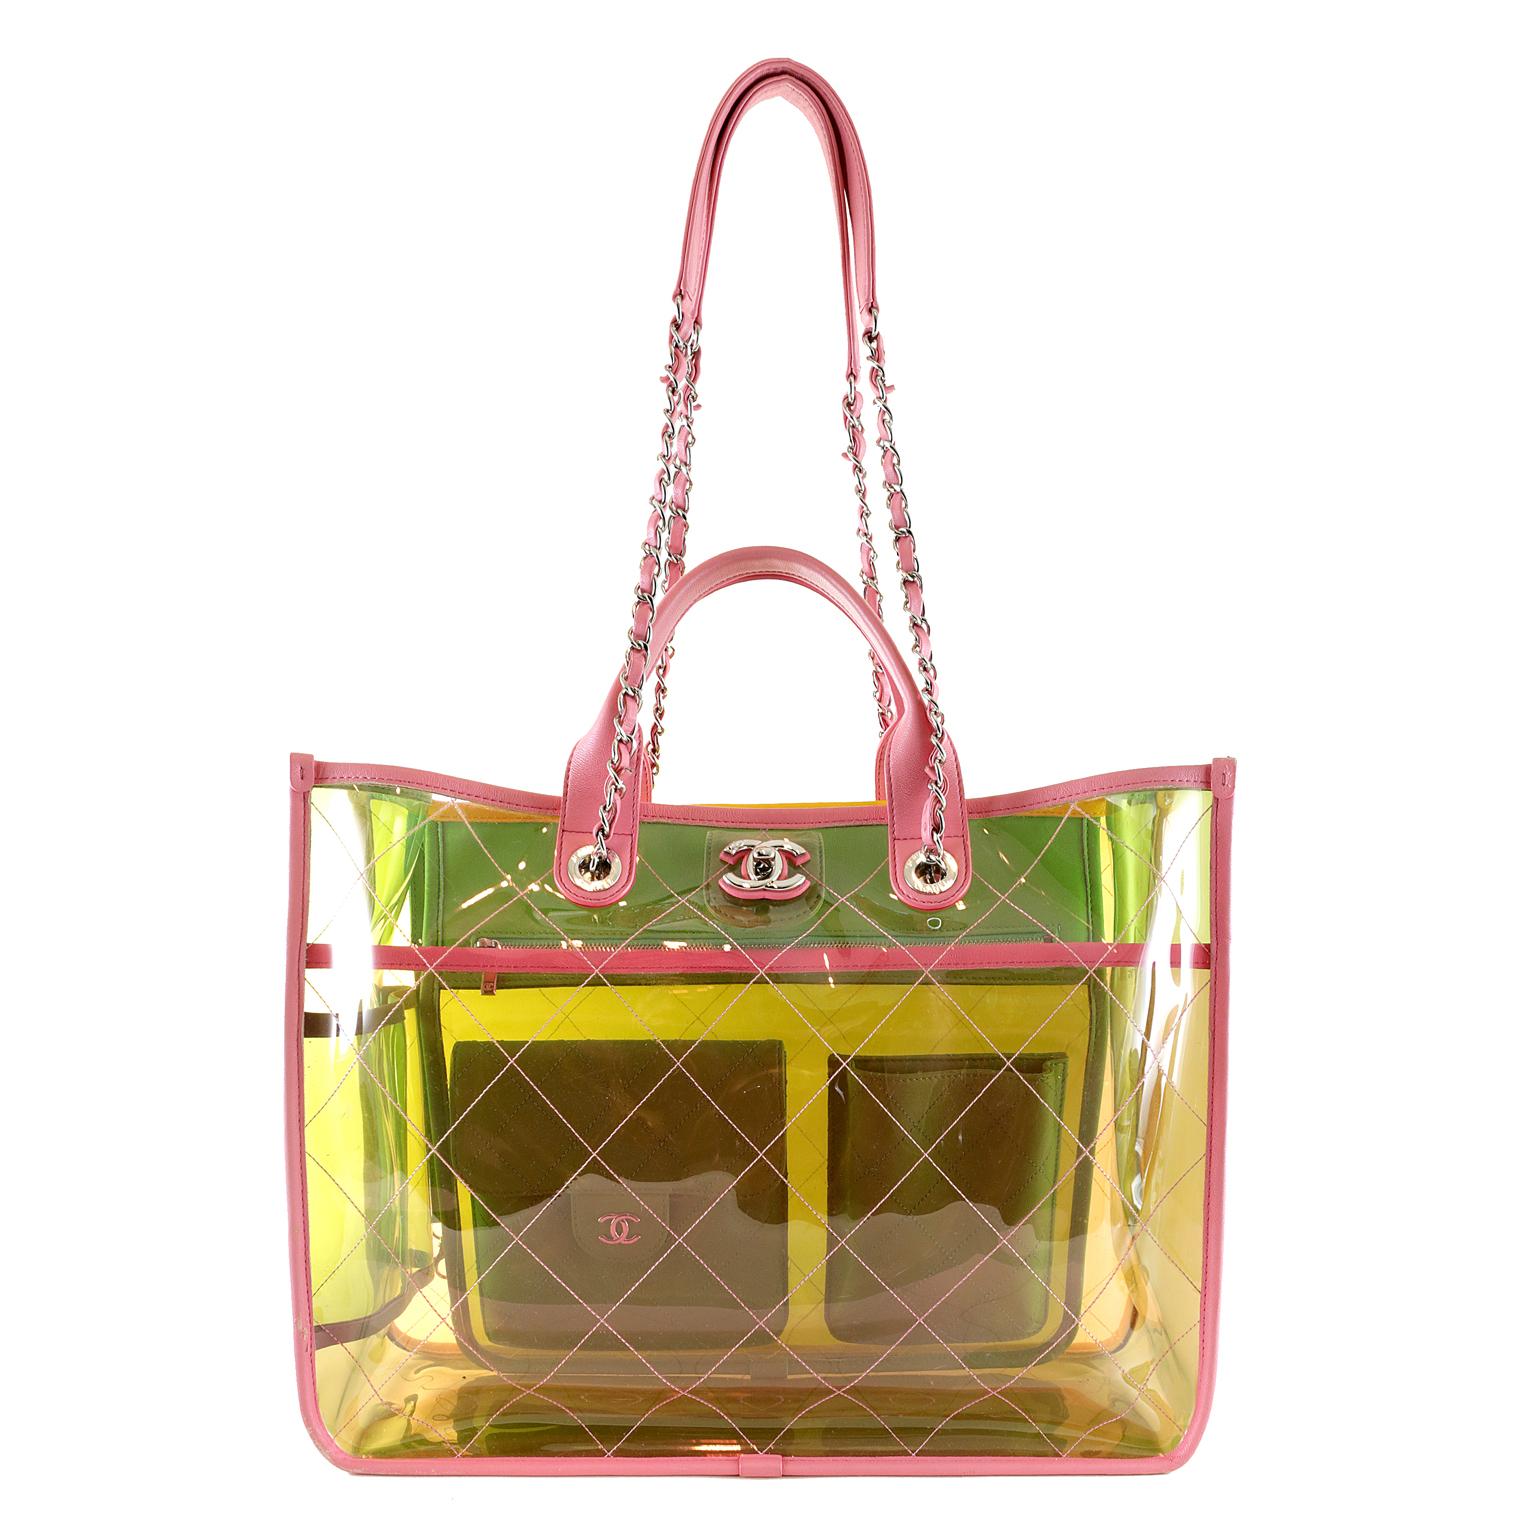 Chanel Coco Splash Multi Color Shopper- pristine condition, appearing never carrie
From the Spring Summer 2018 collection, this whimsical piece is perfect for trips to the beach or town.  Rare in the multicolored version.  
Multicolored PVC is